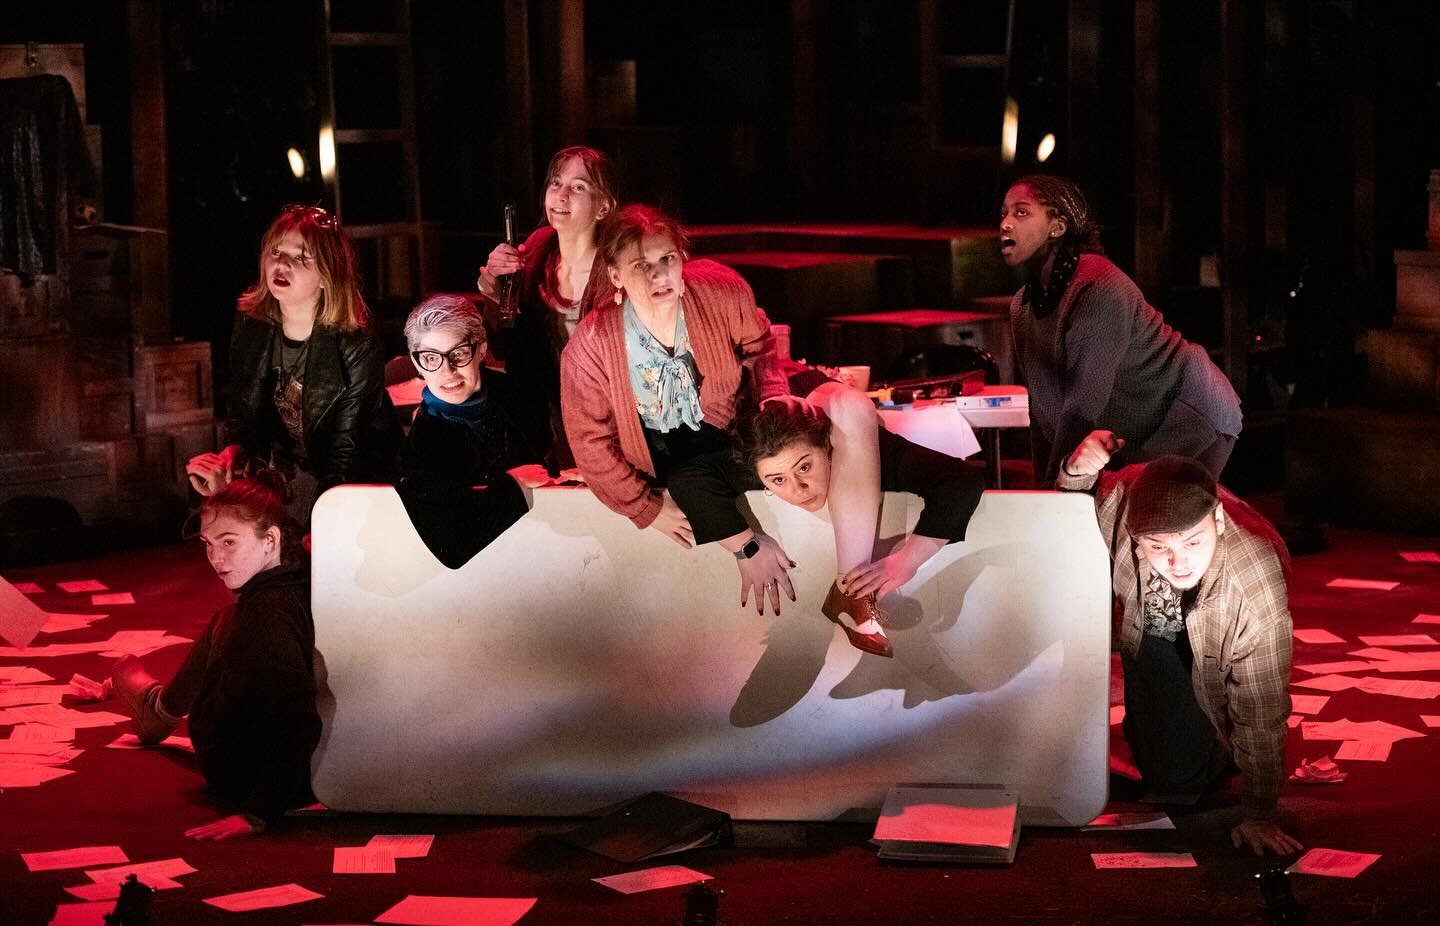 Directed by David Zobell, @danidangerstoller &lsquo;s &ldquo;The Possum Neck Playhouse Presents Eli Thomas Neatherwood&rsquo;s Award-Winning Adaptation of the Canterbury Tales&rdquo; at @sigtheatre has come to a close. This has been an amazing produc